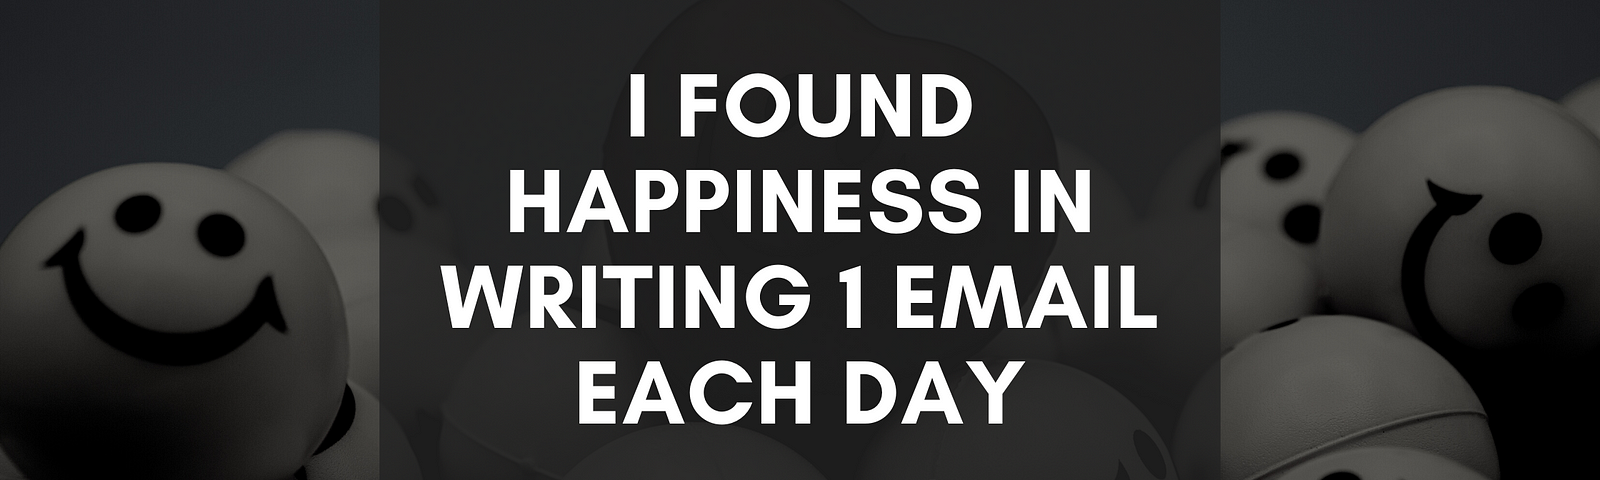 Smiley face stress balls with the title of the story in the foreground “I found happiness in writing 1 email each day” and subtitle “give it a try!”.